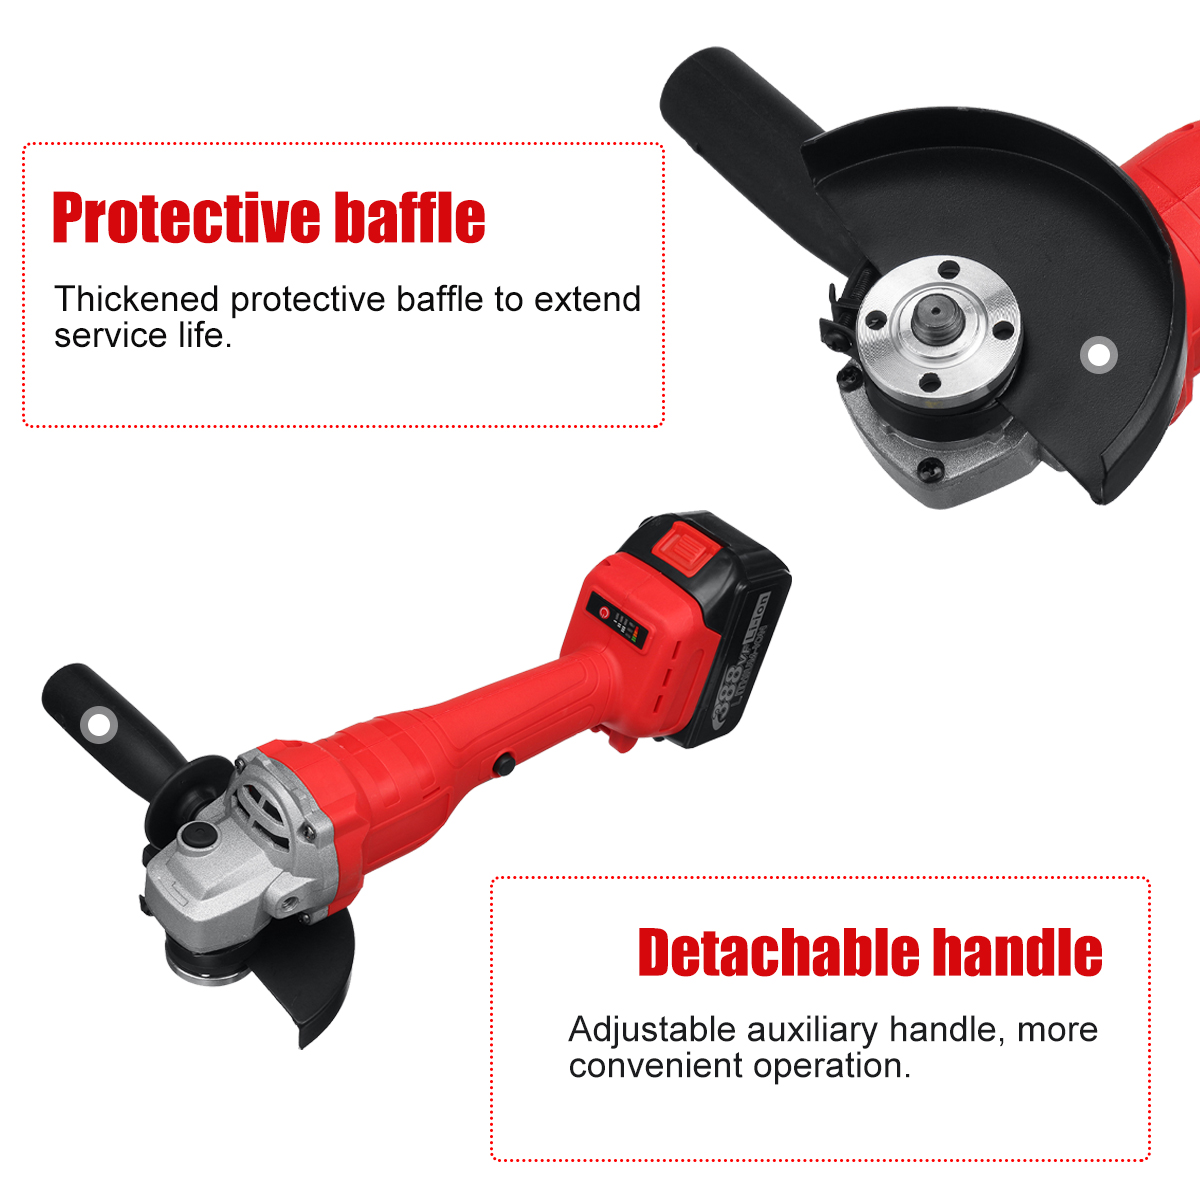 388VF-125MM-1500W-Cordless-Brushless-Angle-Grinder-Electric-Polisher-W-None12-Battery-Cutting-Sand-D-1879534-4